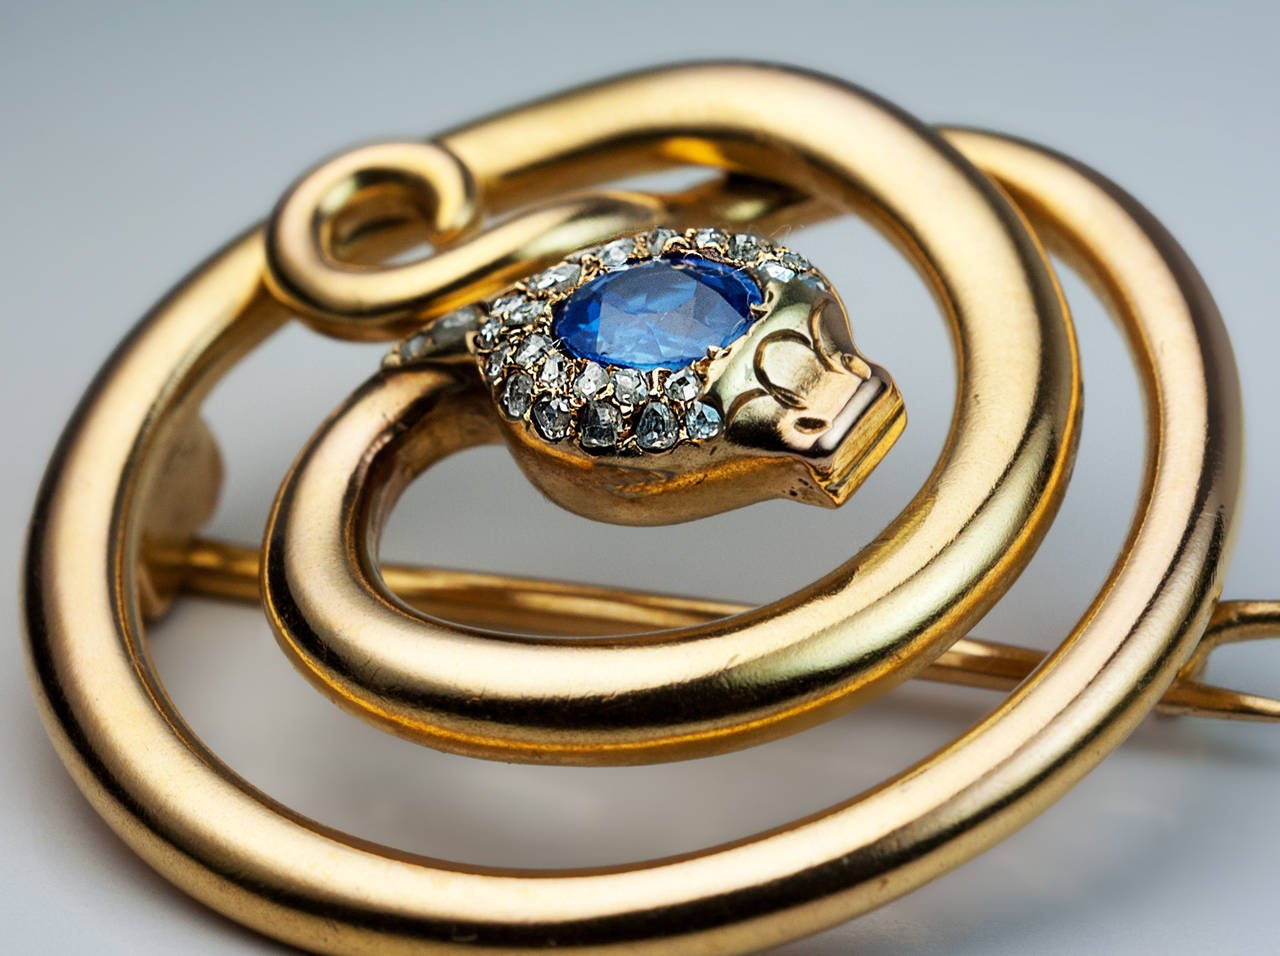 A Stylish Antique Victorian Era Snake Brooch Pin

made in St. Petersburg between 1882 and 1898

The 14K gold brooch is designed as a stylized coiled snake.
The head of the snake is embellished with a blue sapphire (approximately 0.42 ct)